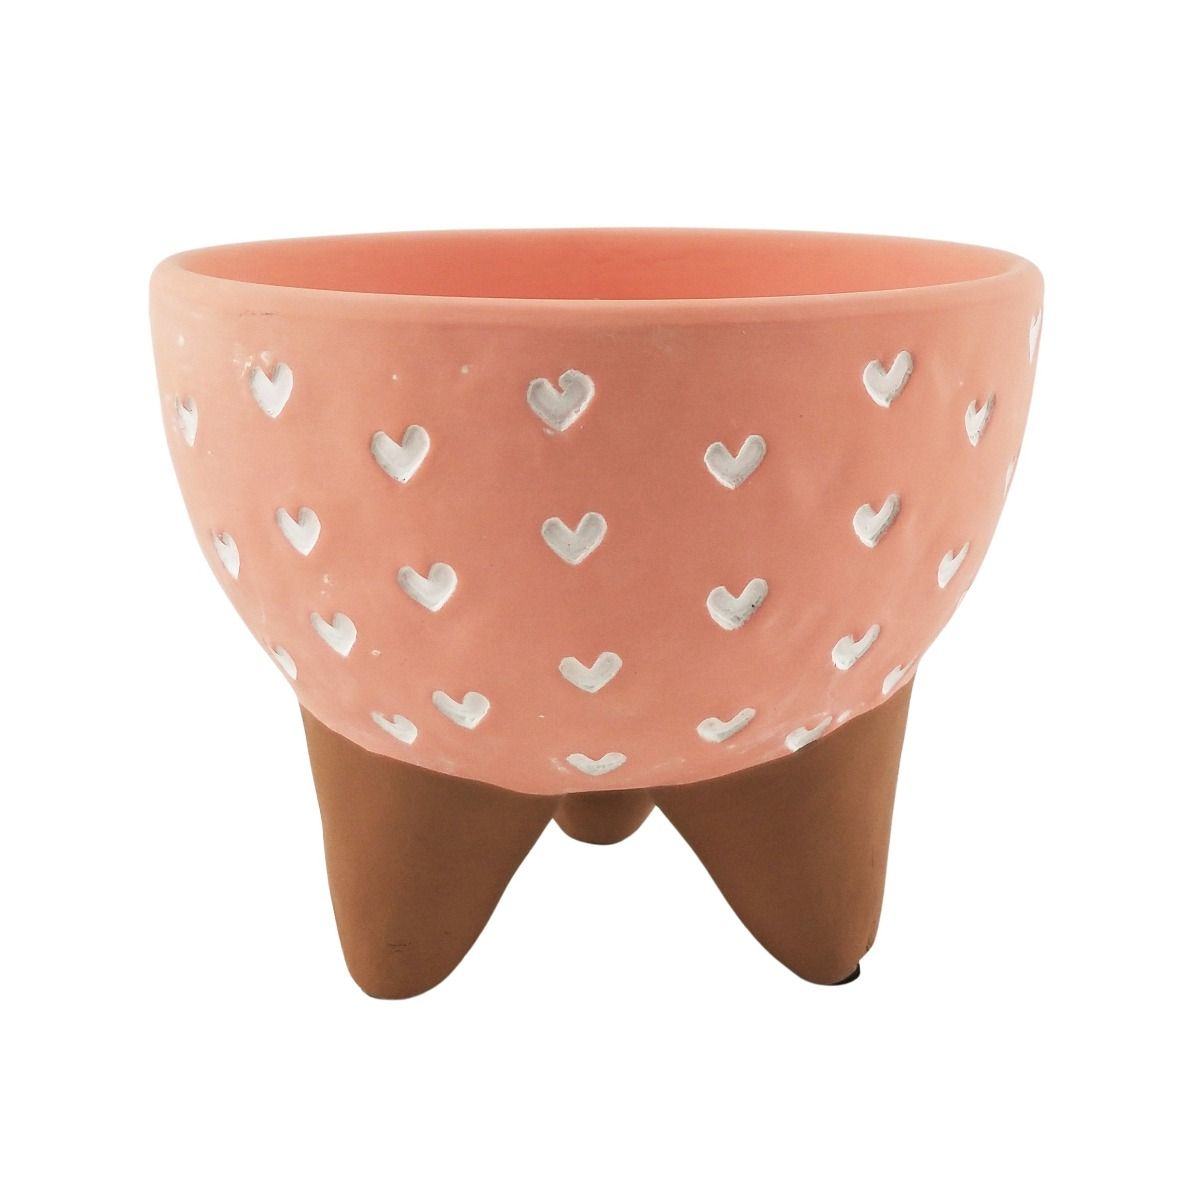 Hearts Pot with Legs